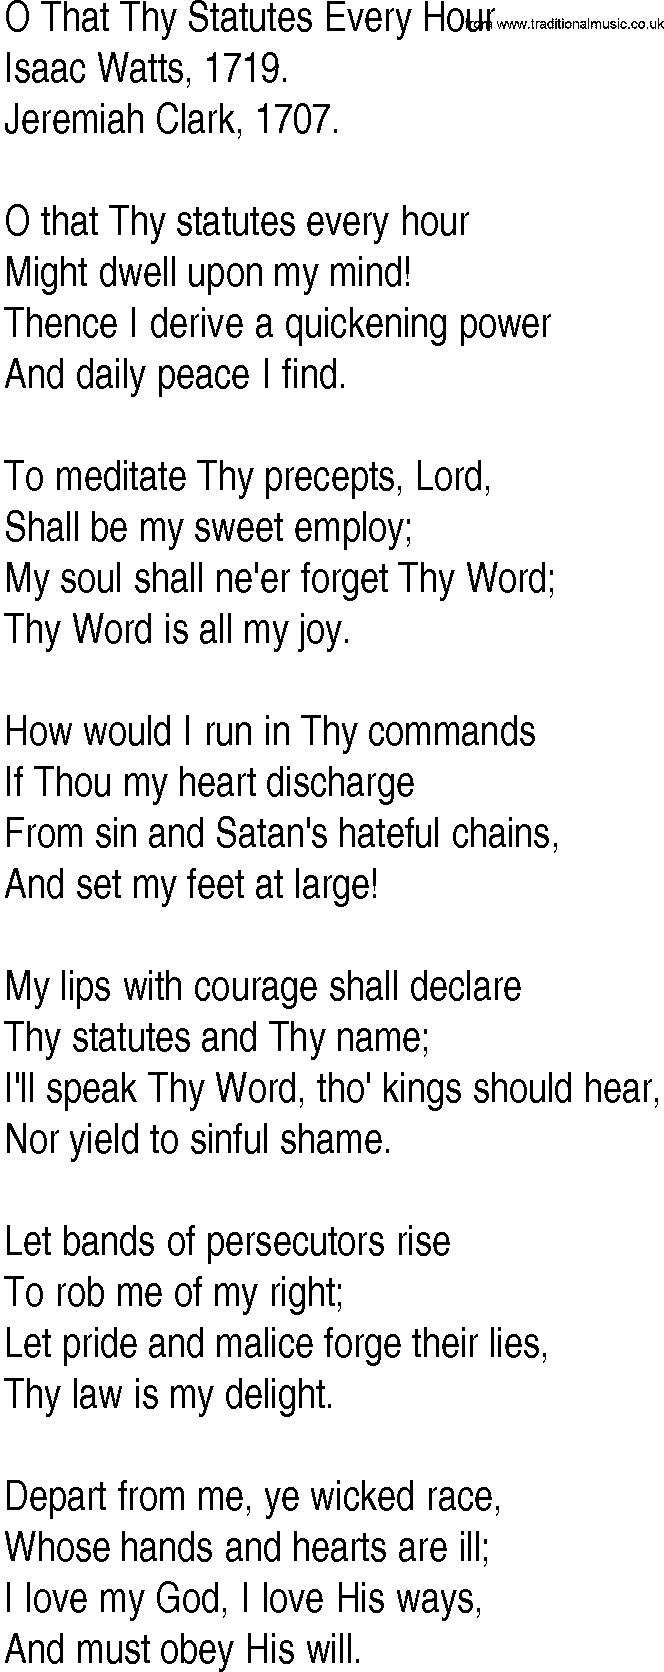 Hymn and Gospel Song: O That Thy Statutes Every Hour by Isaac Watts lyrics